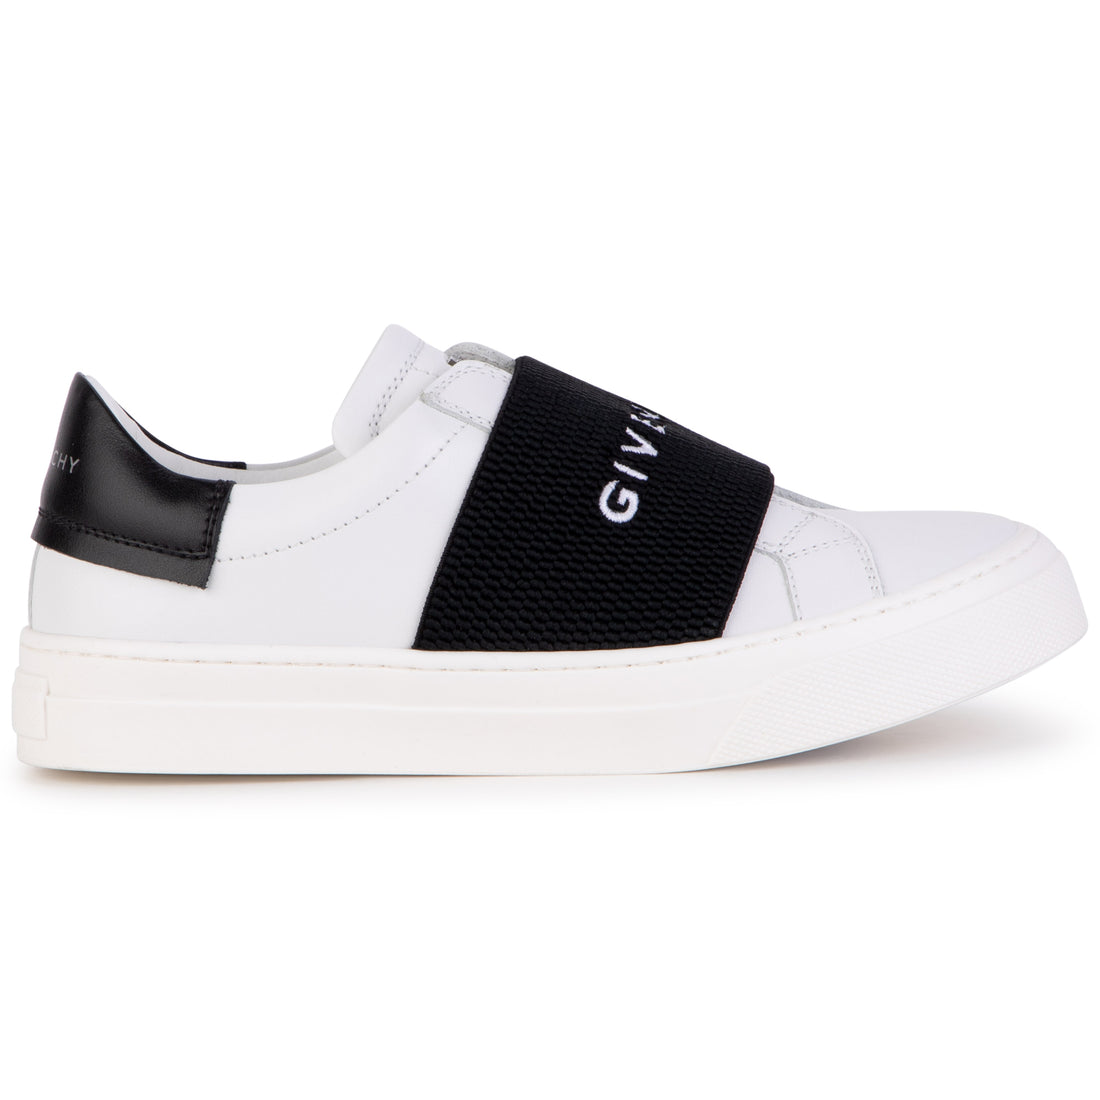 Givenchy Trainers Style: H29095